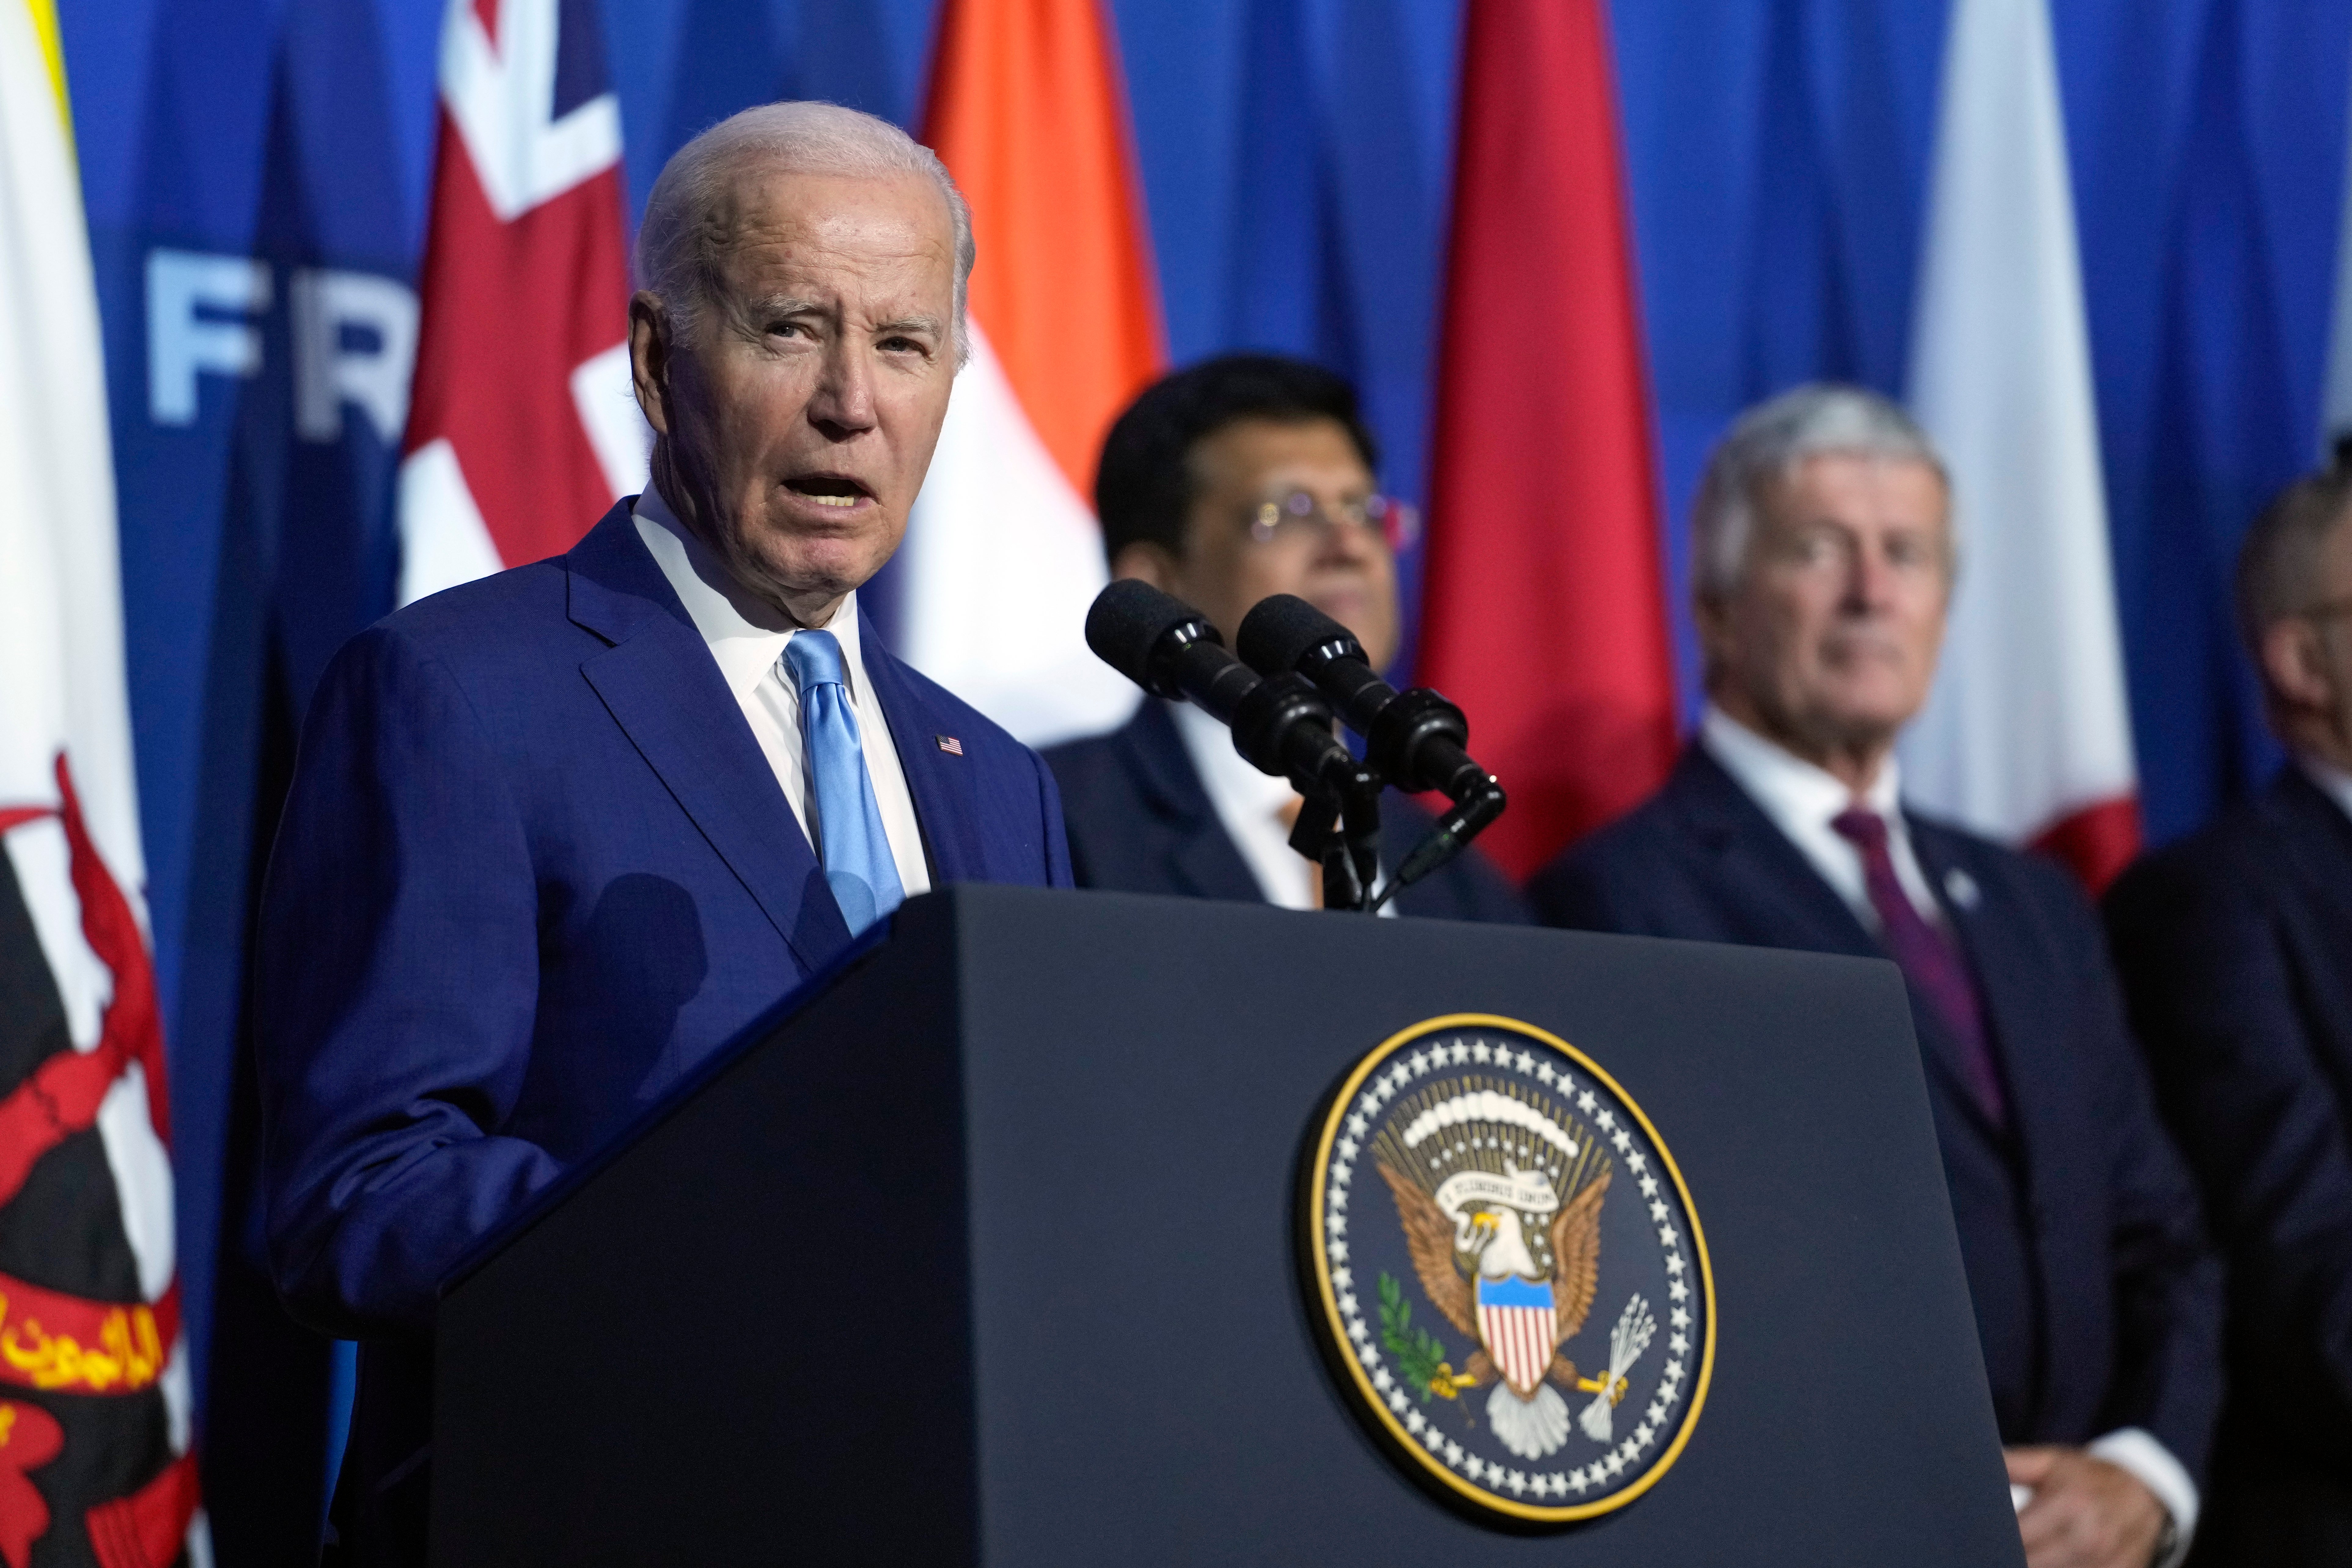 President Joe Biden speaks after the Indo-Pacific Economic Framework family photo at the Asia-Pacific Economic Cooperation summit, Thursday, Nov. 16, 2023, in San Francisco. (AP Photo/Godofredo A. VÃ¡squez)